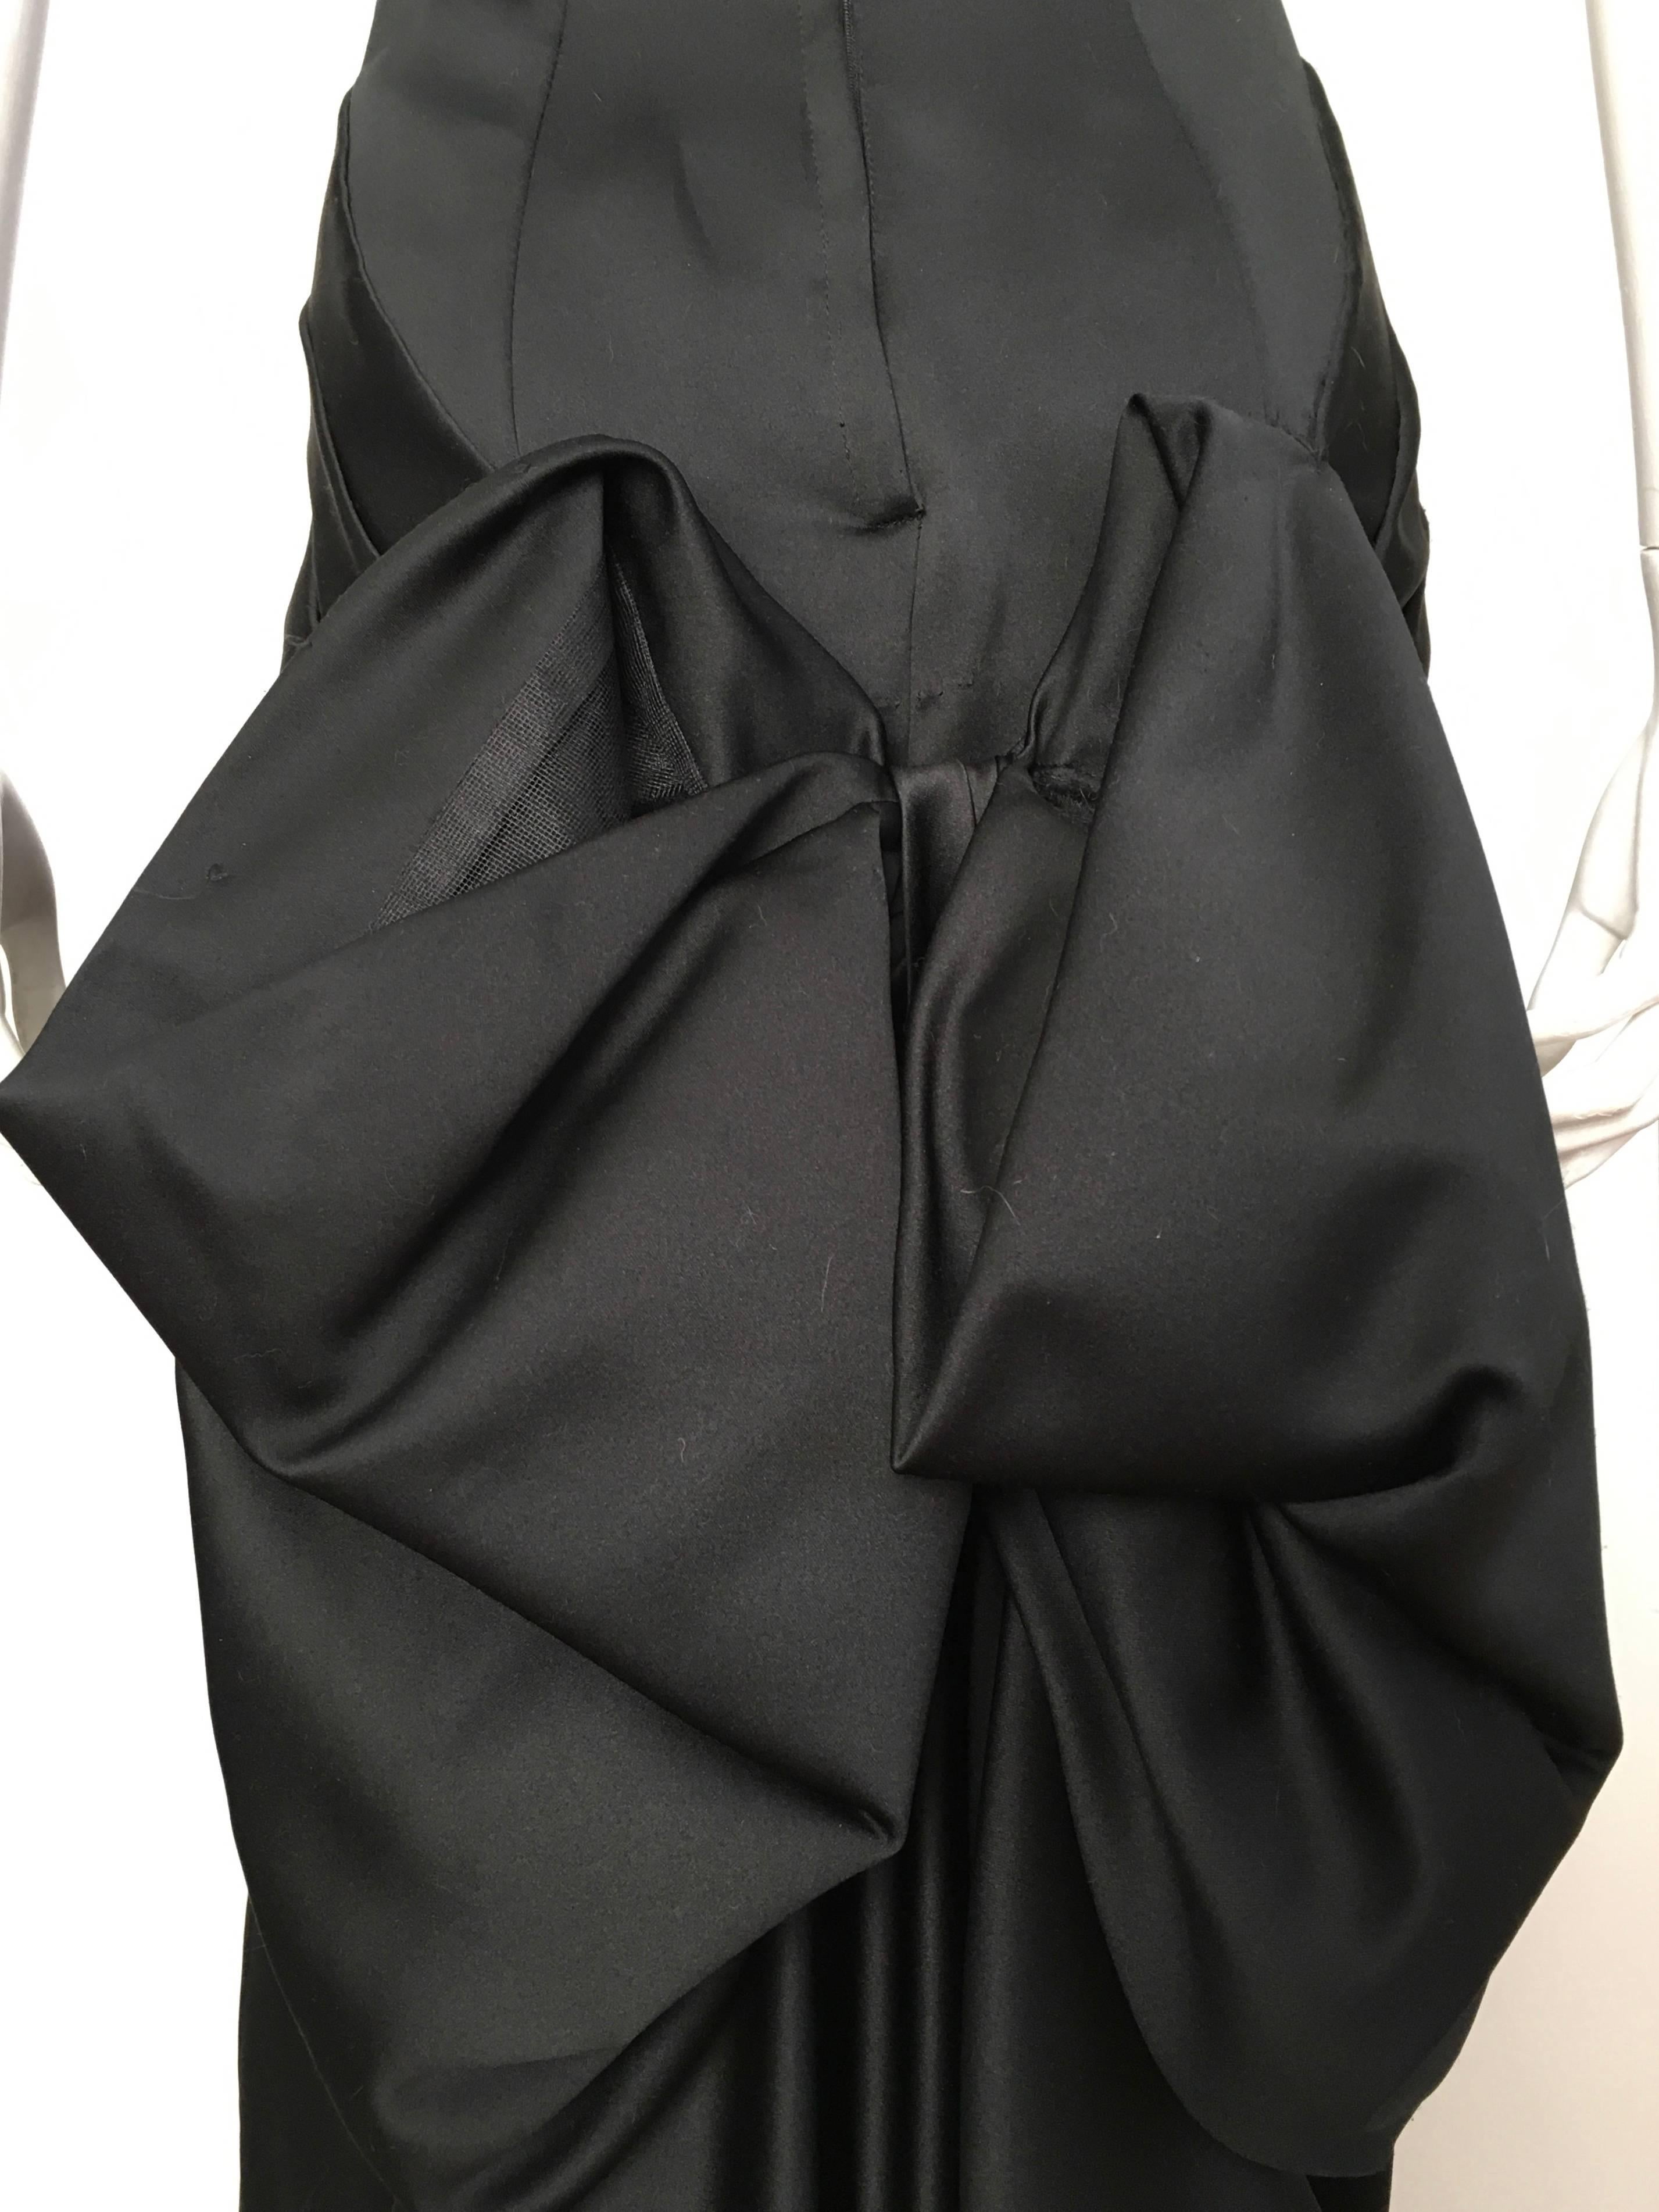 Victor Costa for Bergdorf Goodman Black Strapless Red Carpet Gown Size 4, 1980s For Sale 4